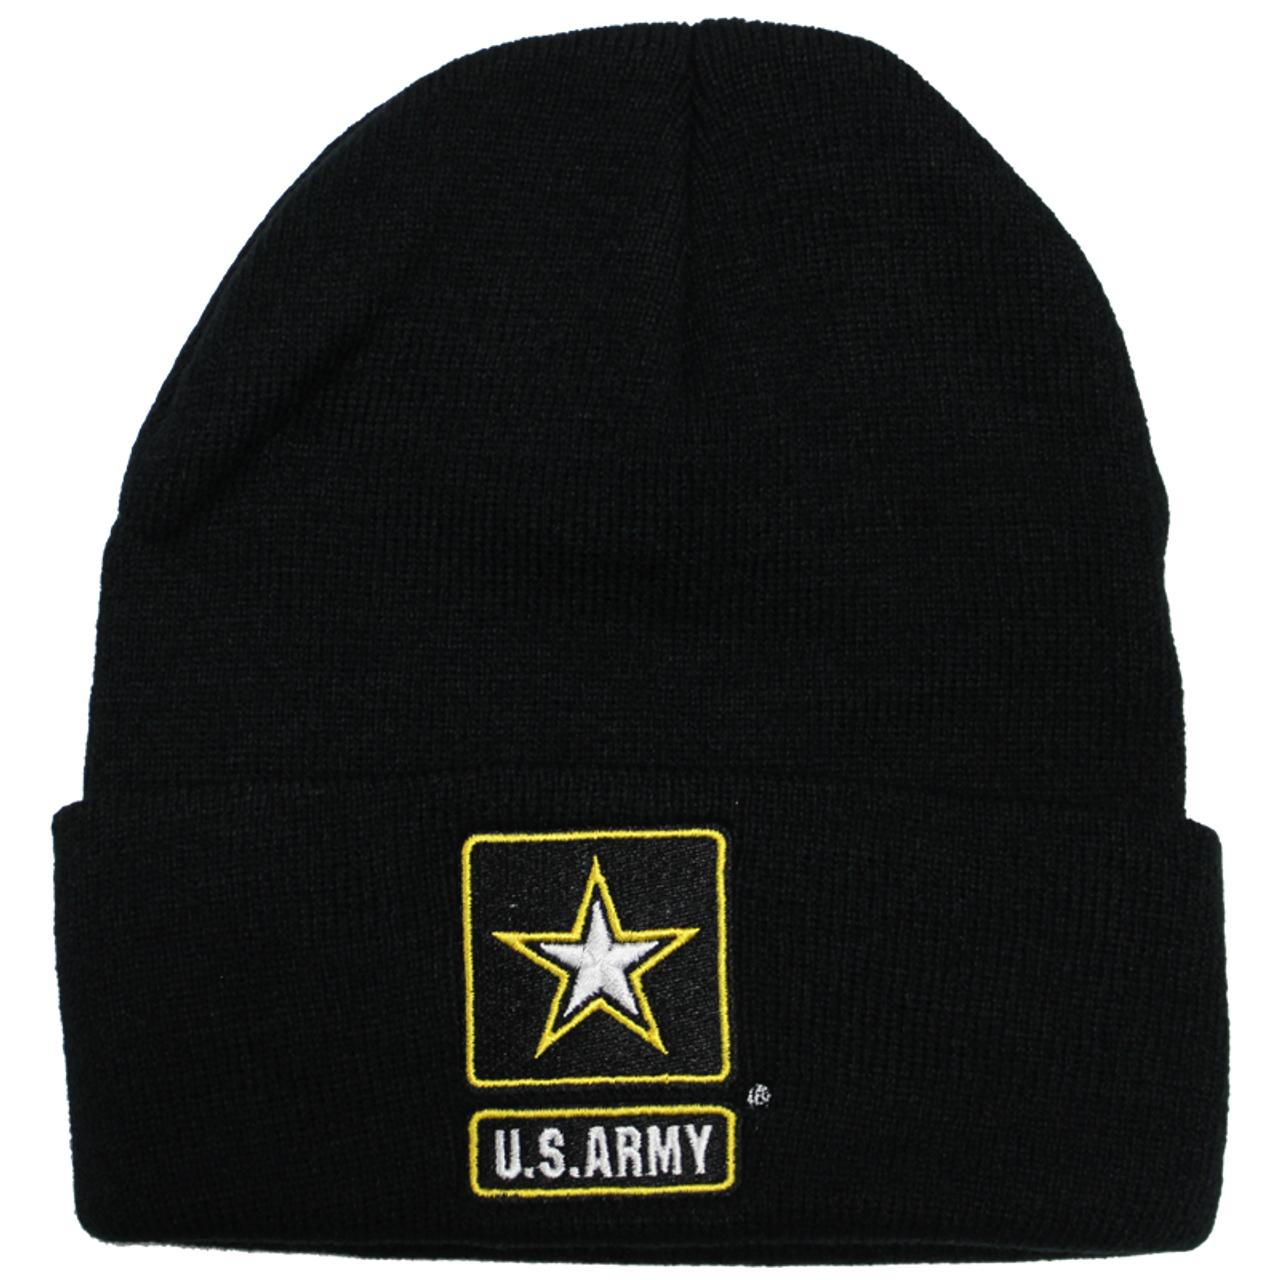 Officially - US Army Embroidered Logo Beanie